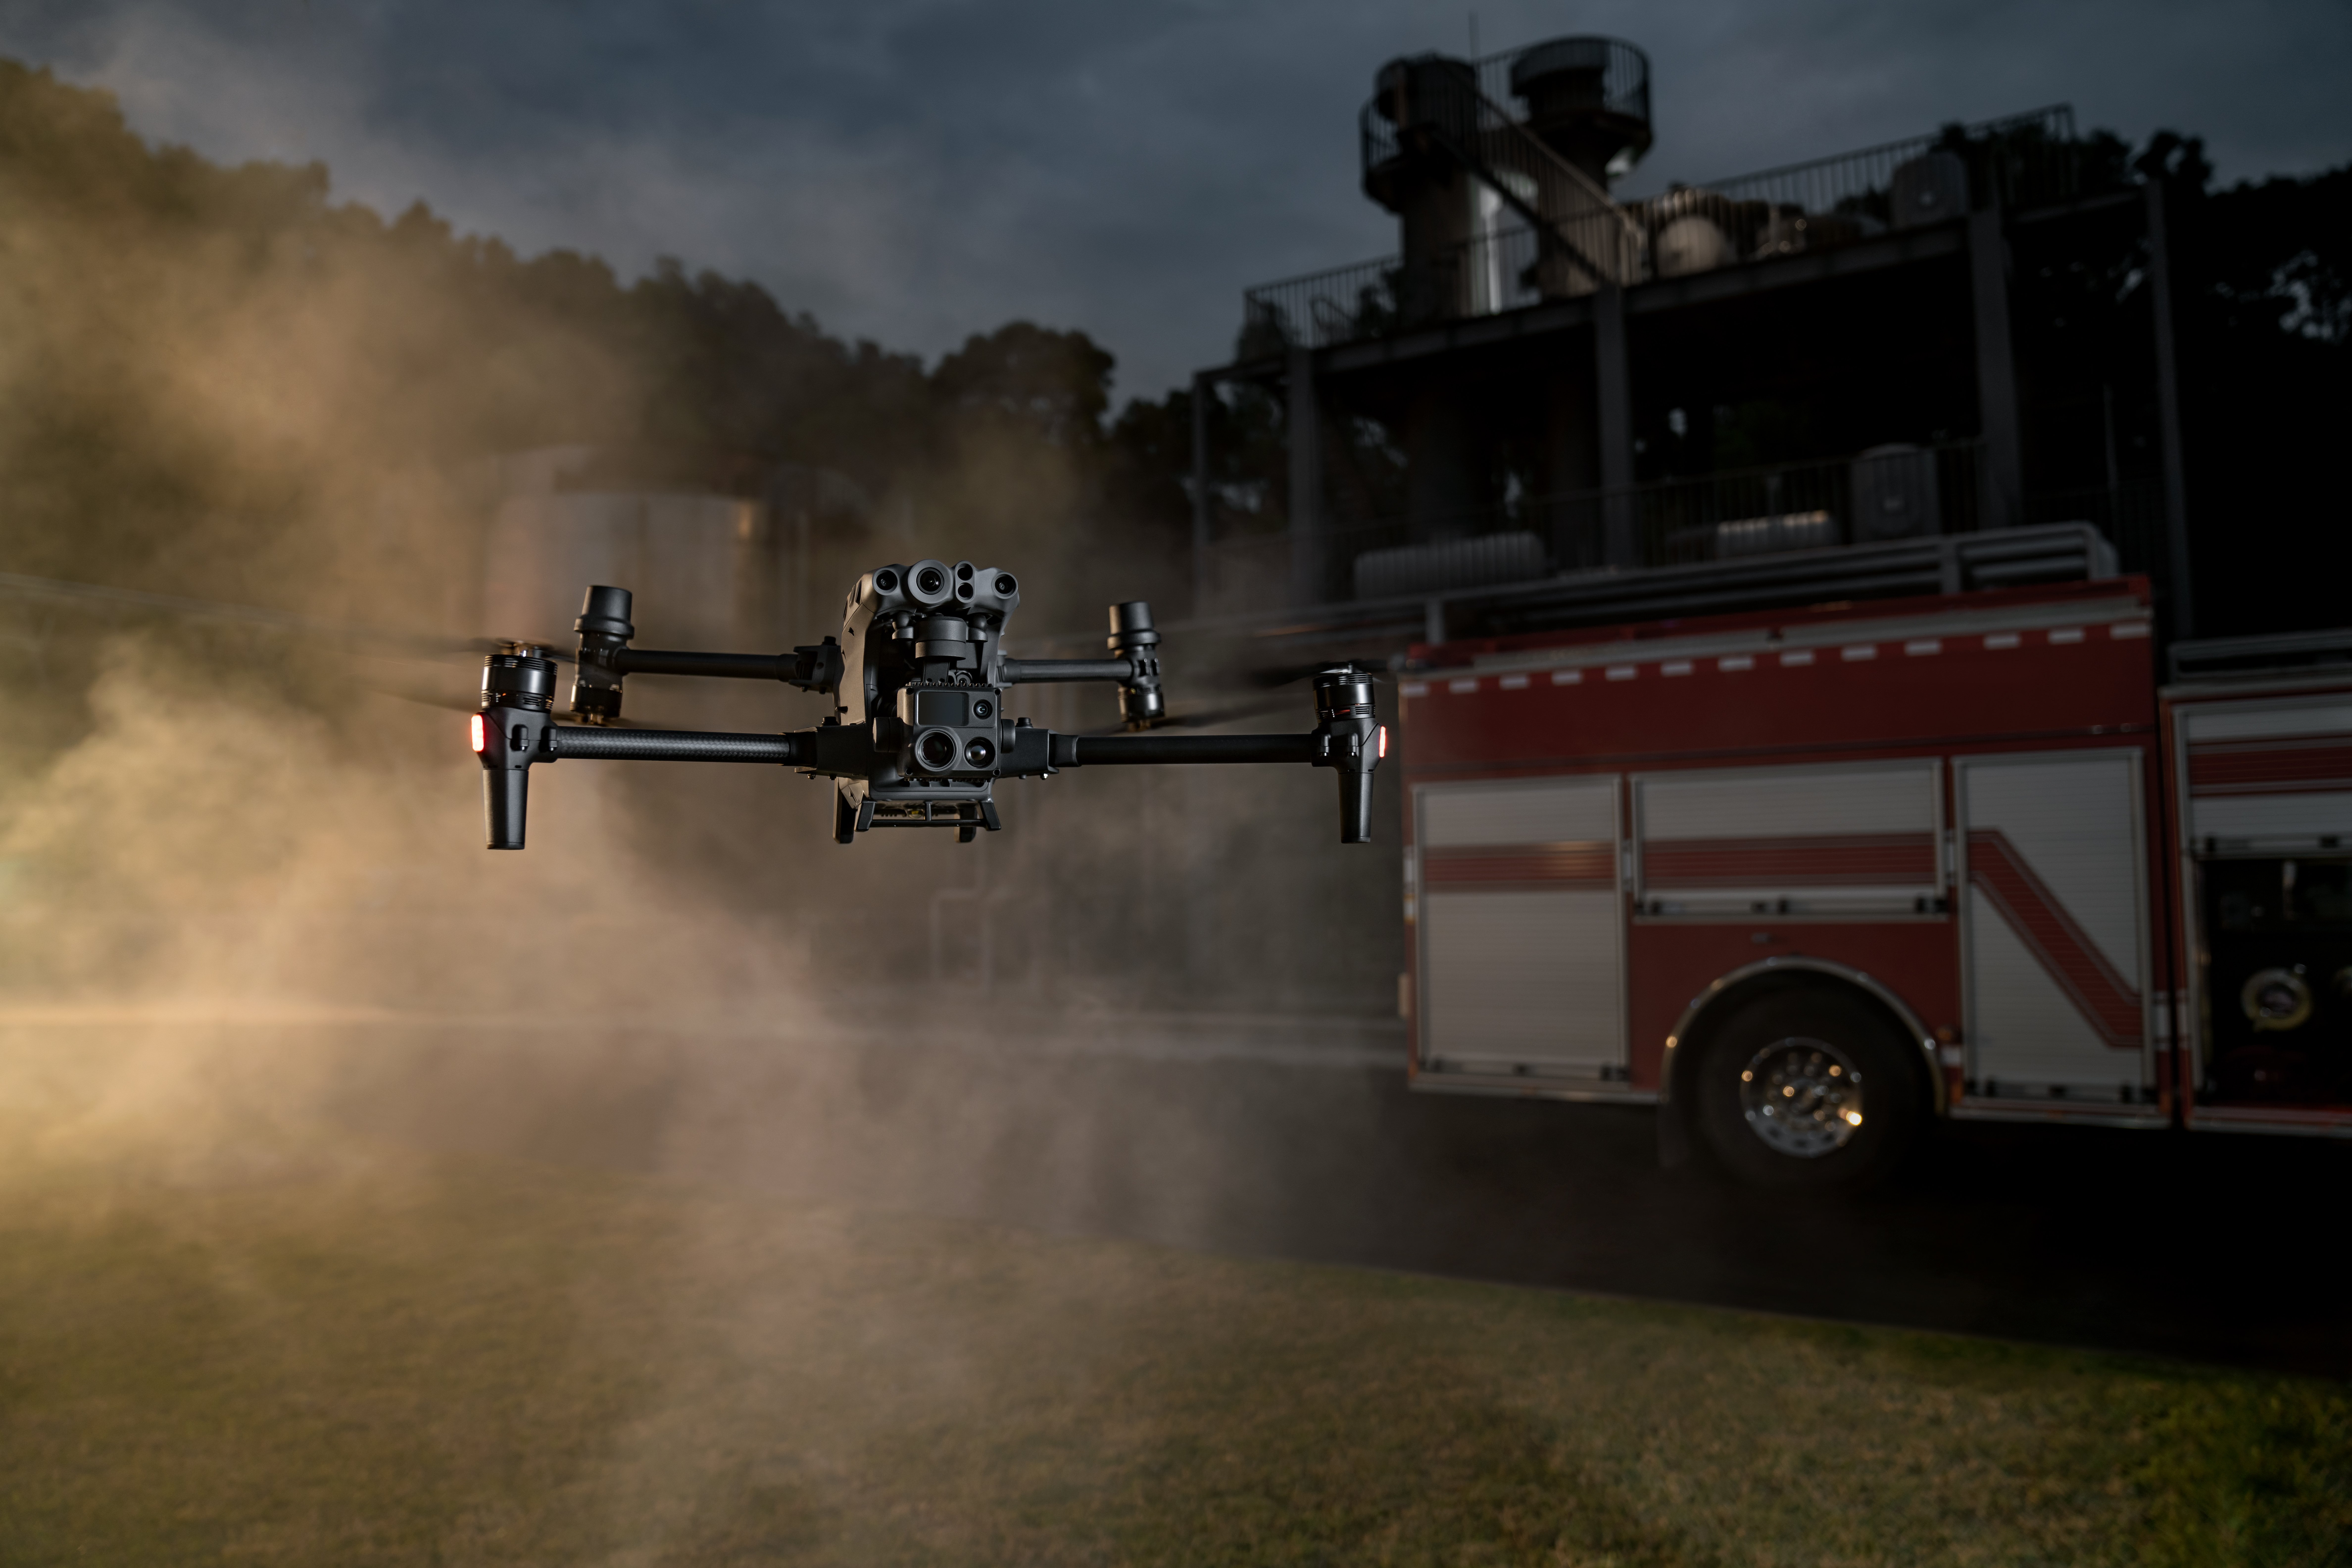 Drone and firetruck